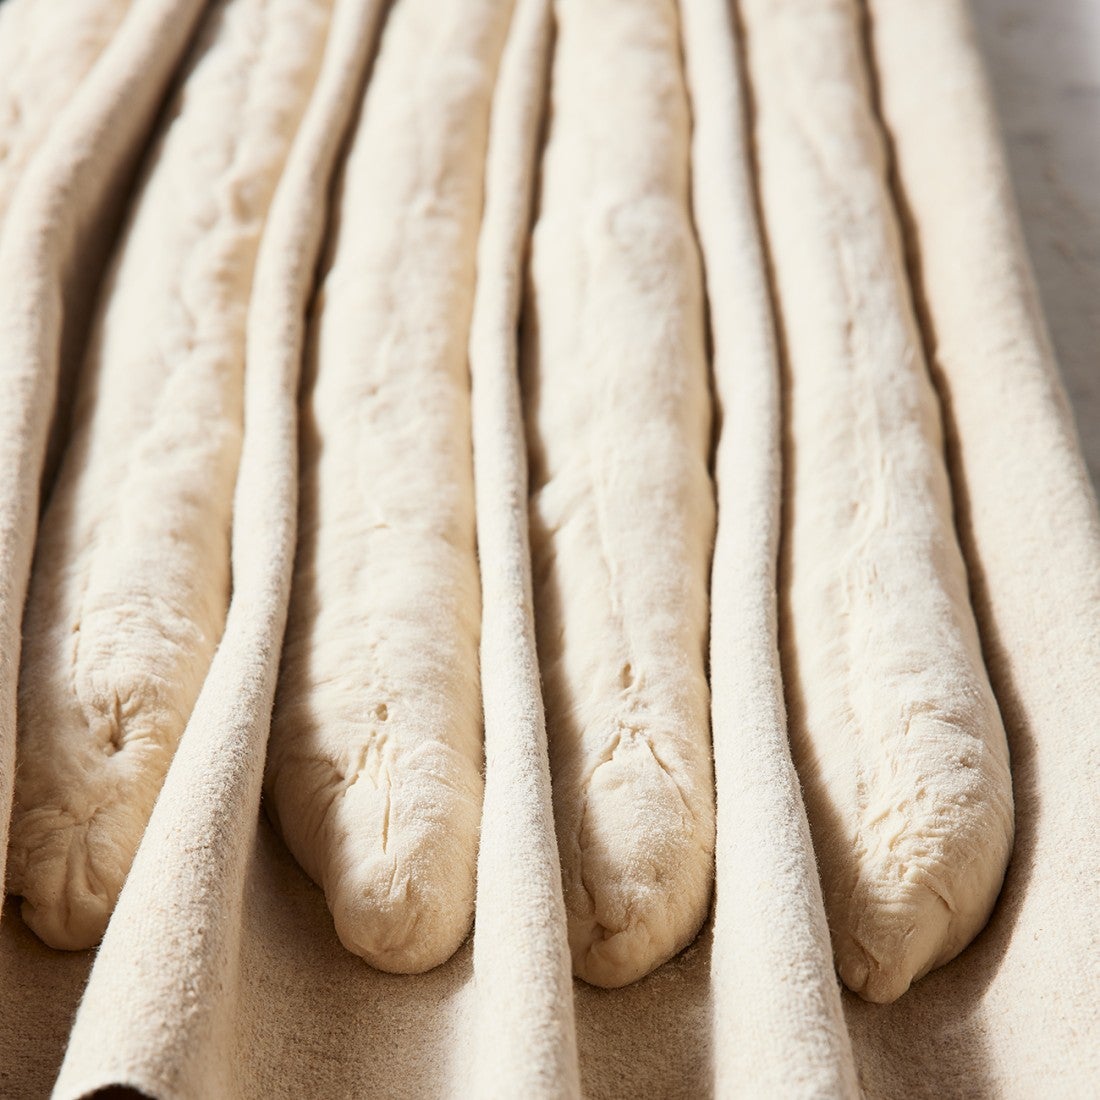 Unbaked baguettes proofing